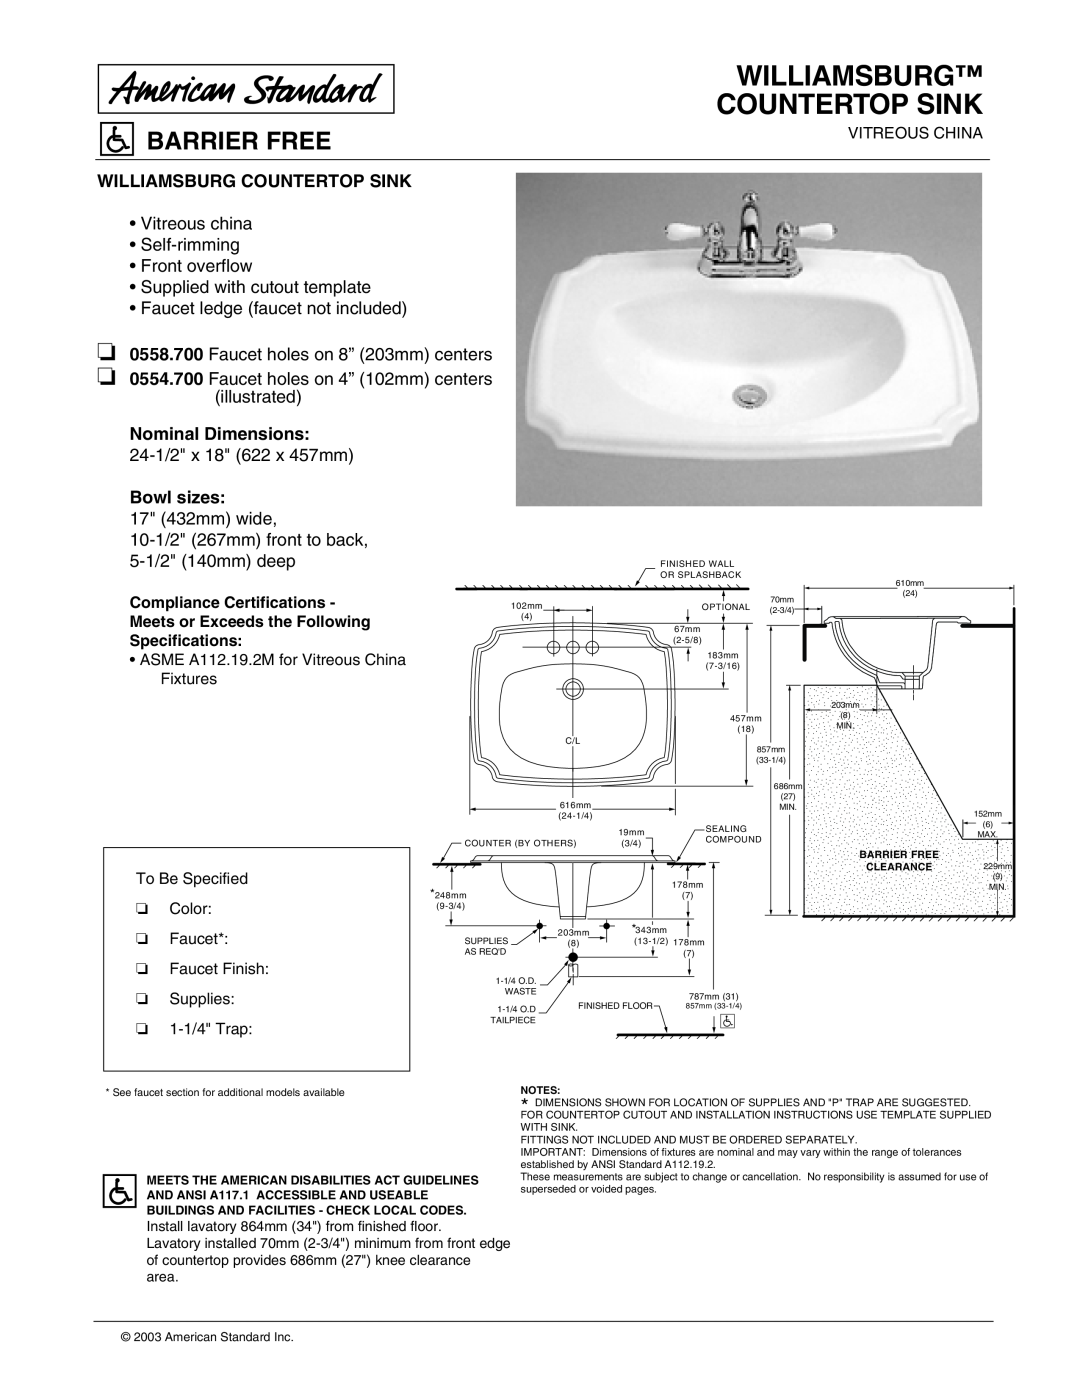 American Standard 0558.700 dimensions Williamsburg Countertop Sink, Barrier Free, Supplied with cutout template, Fixtures 